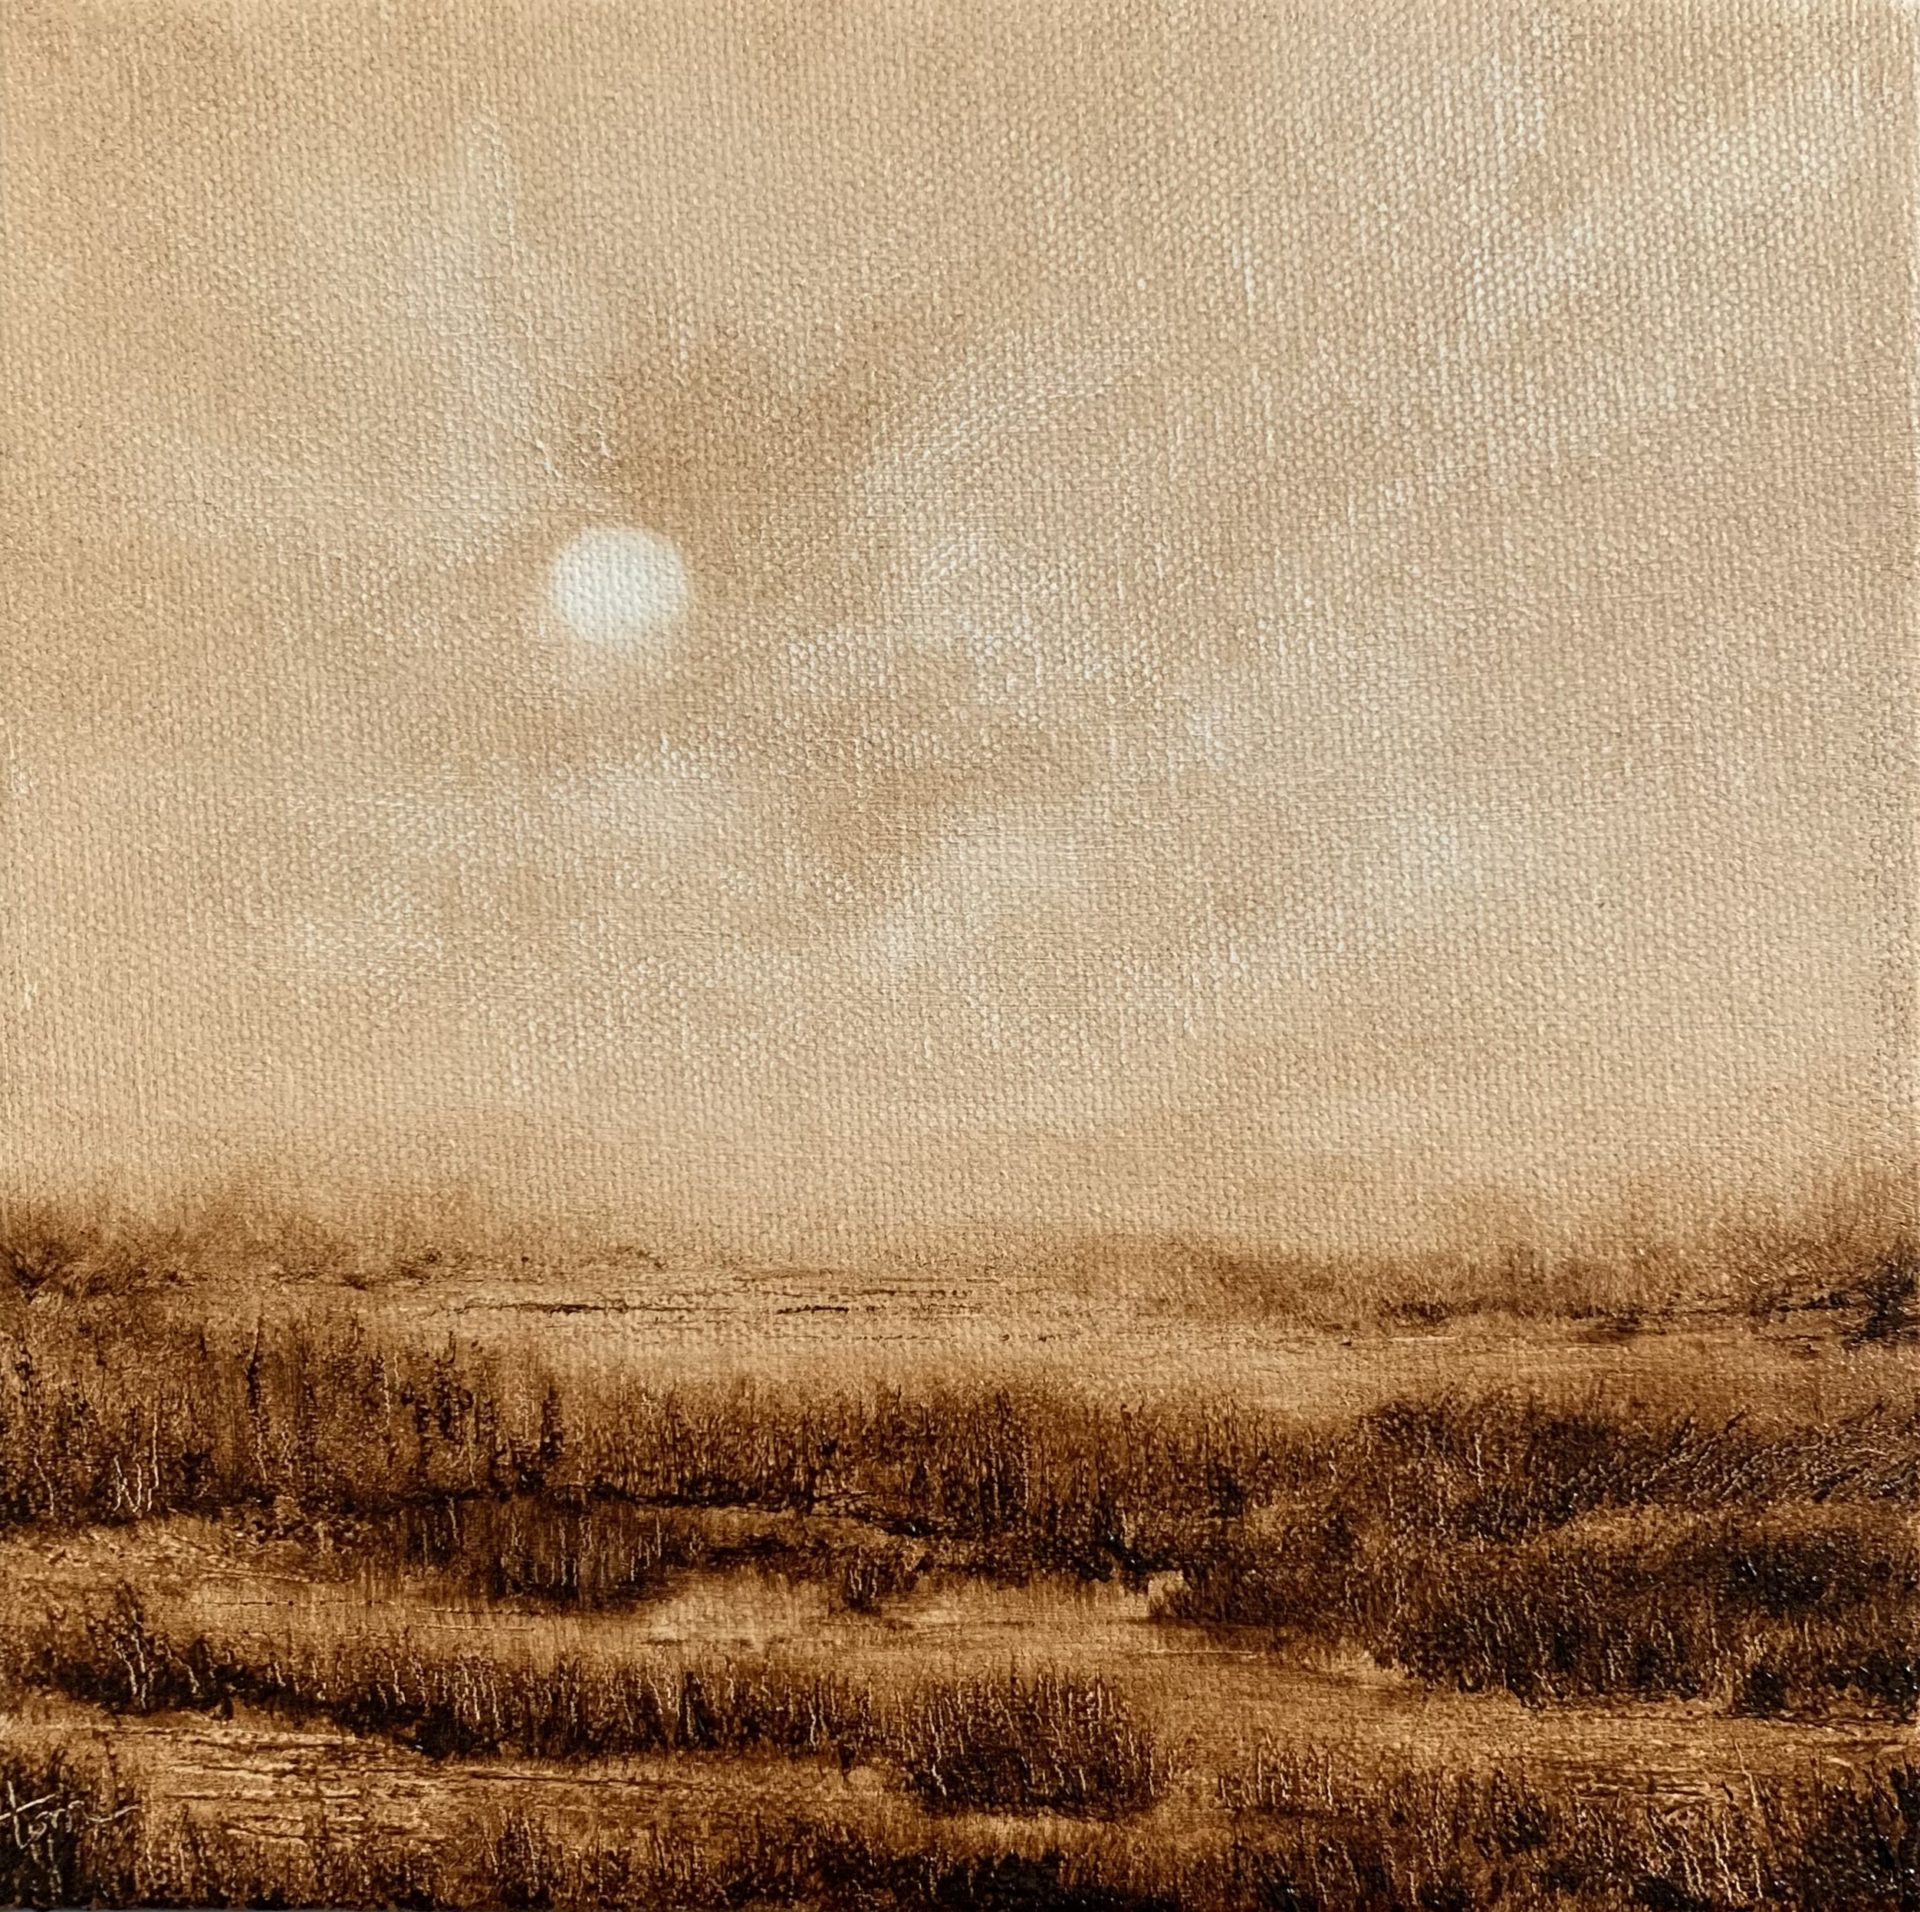 Original oil painting by Tisha Mark, Week 17, 52 Weeks of Finding Light Series, 8"x8" oil on canvas (2023). Painting features a sun or moon rising over a marshy landscape. Painted in a monochromatic limited palette of earthy browns, reminiscent of a sepia-toned photograph.